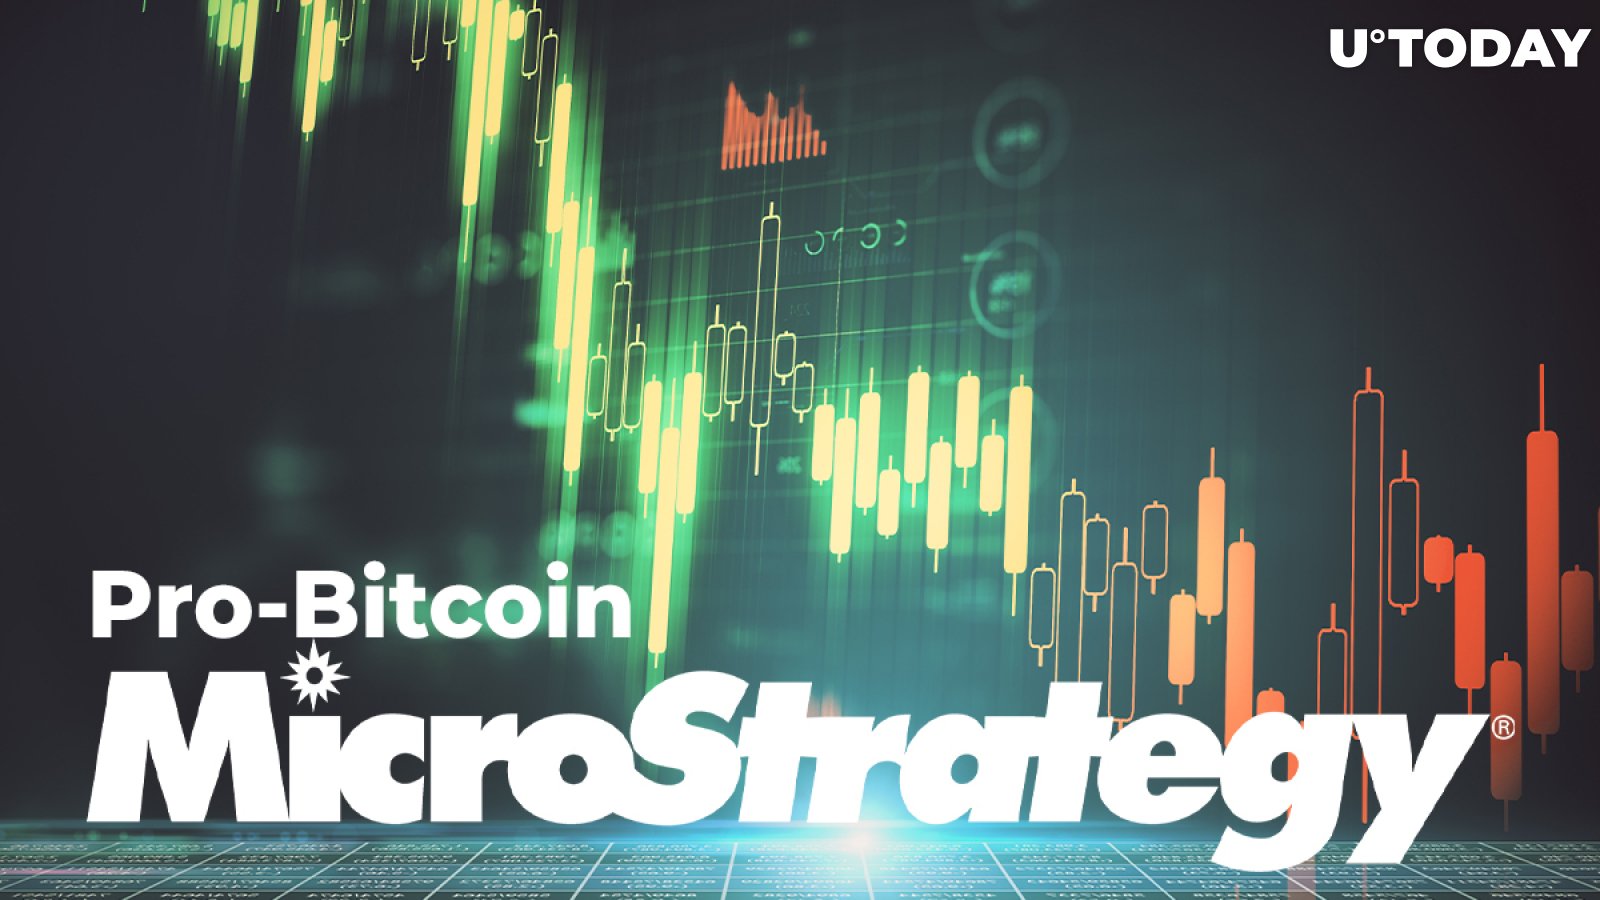 Pro-Bitcoin Microstrategy Stocks Down 50% in Two Weeks. Is Crypto to Blame?